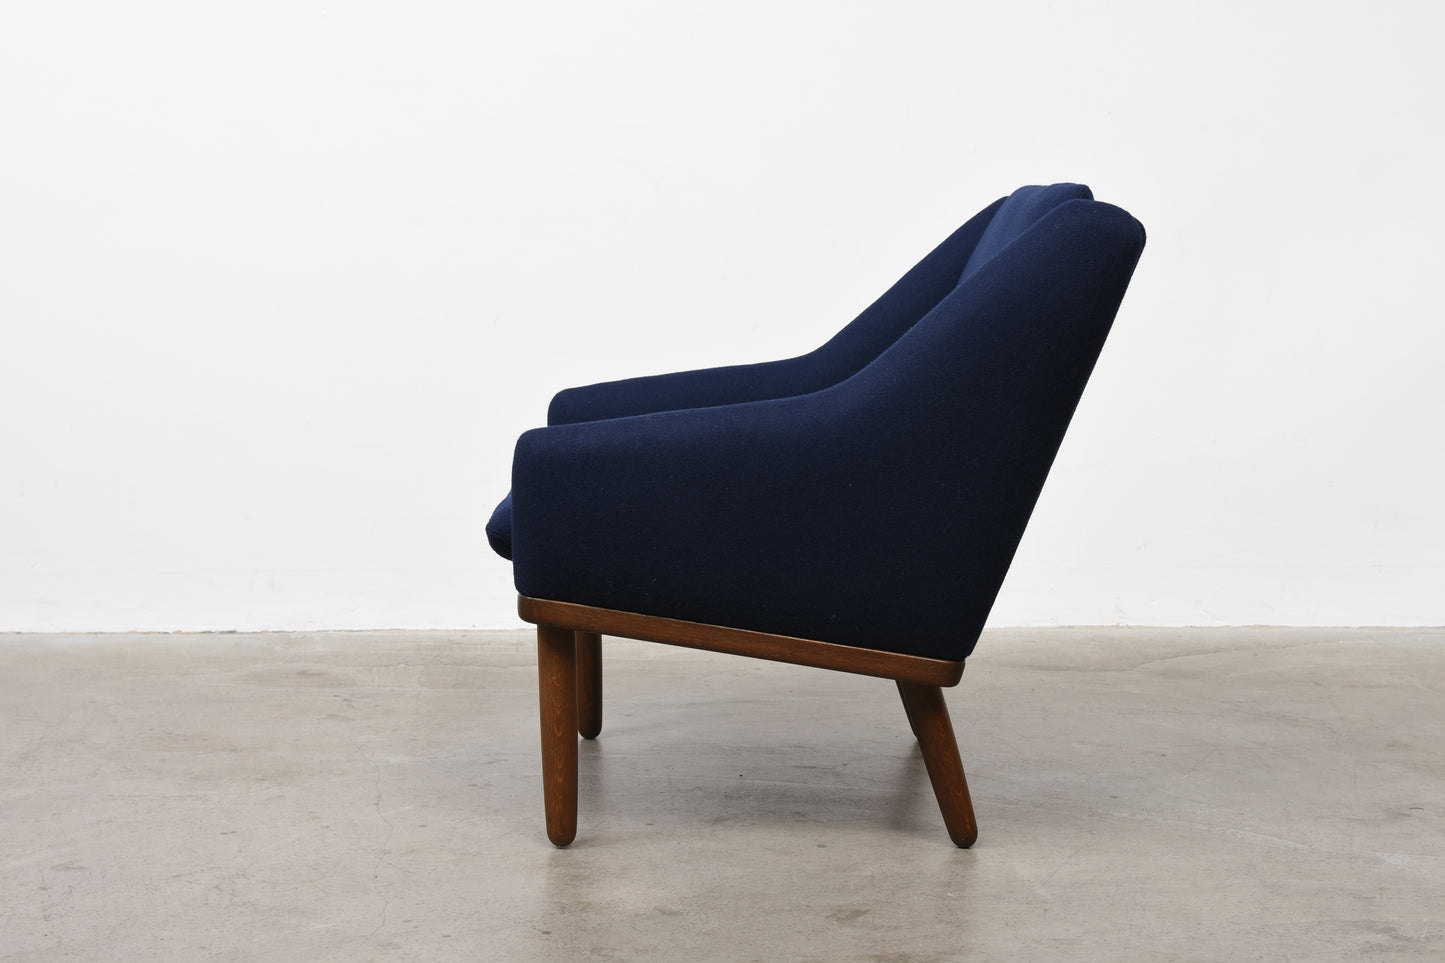 Felt wool lounger by Poul Volther